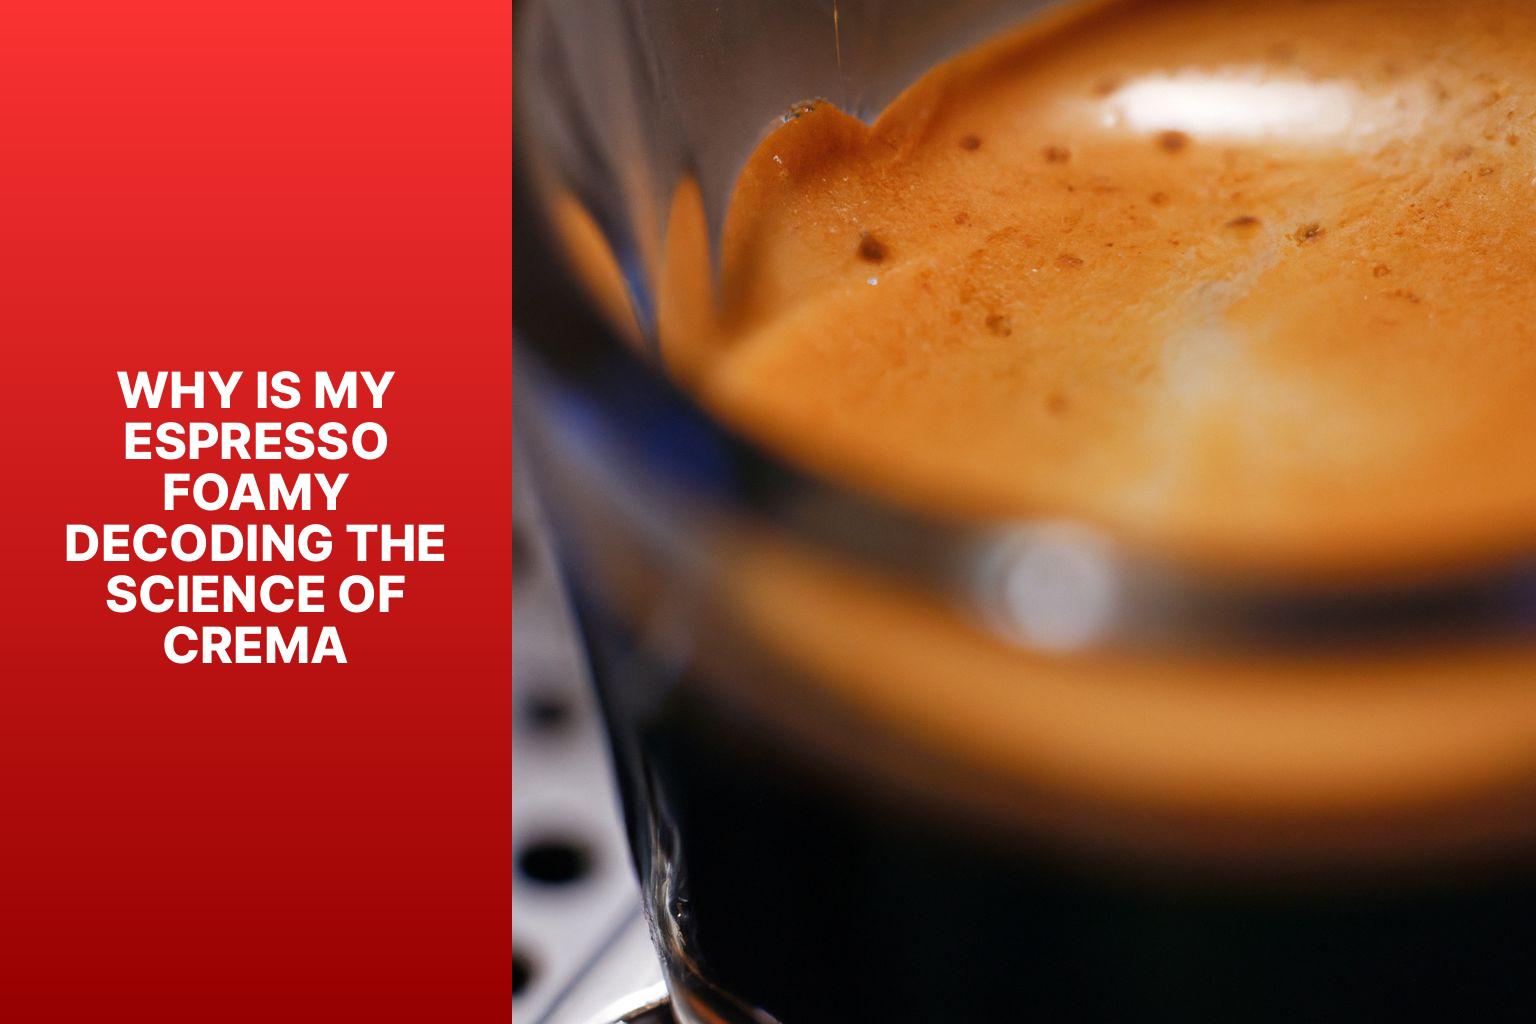 Why is My Espresso Foamy? Decoding the Science of Crema